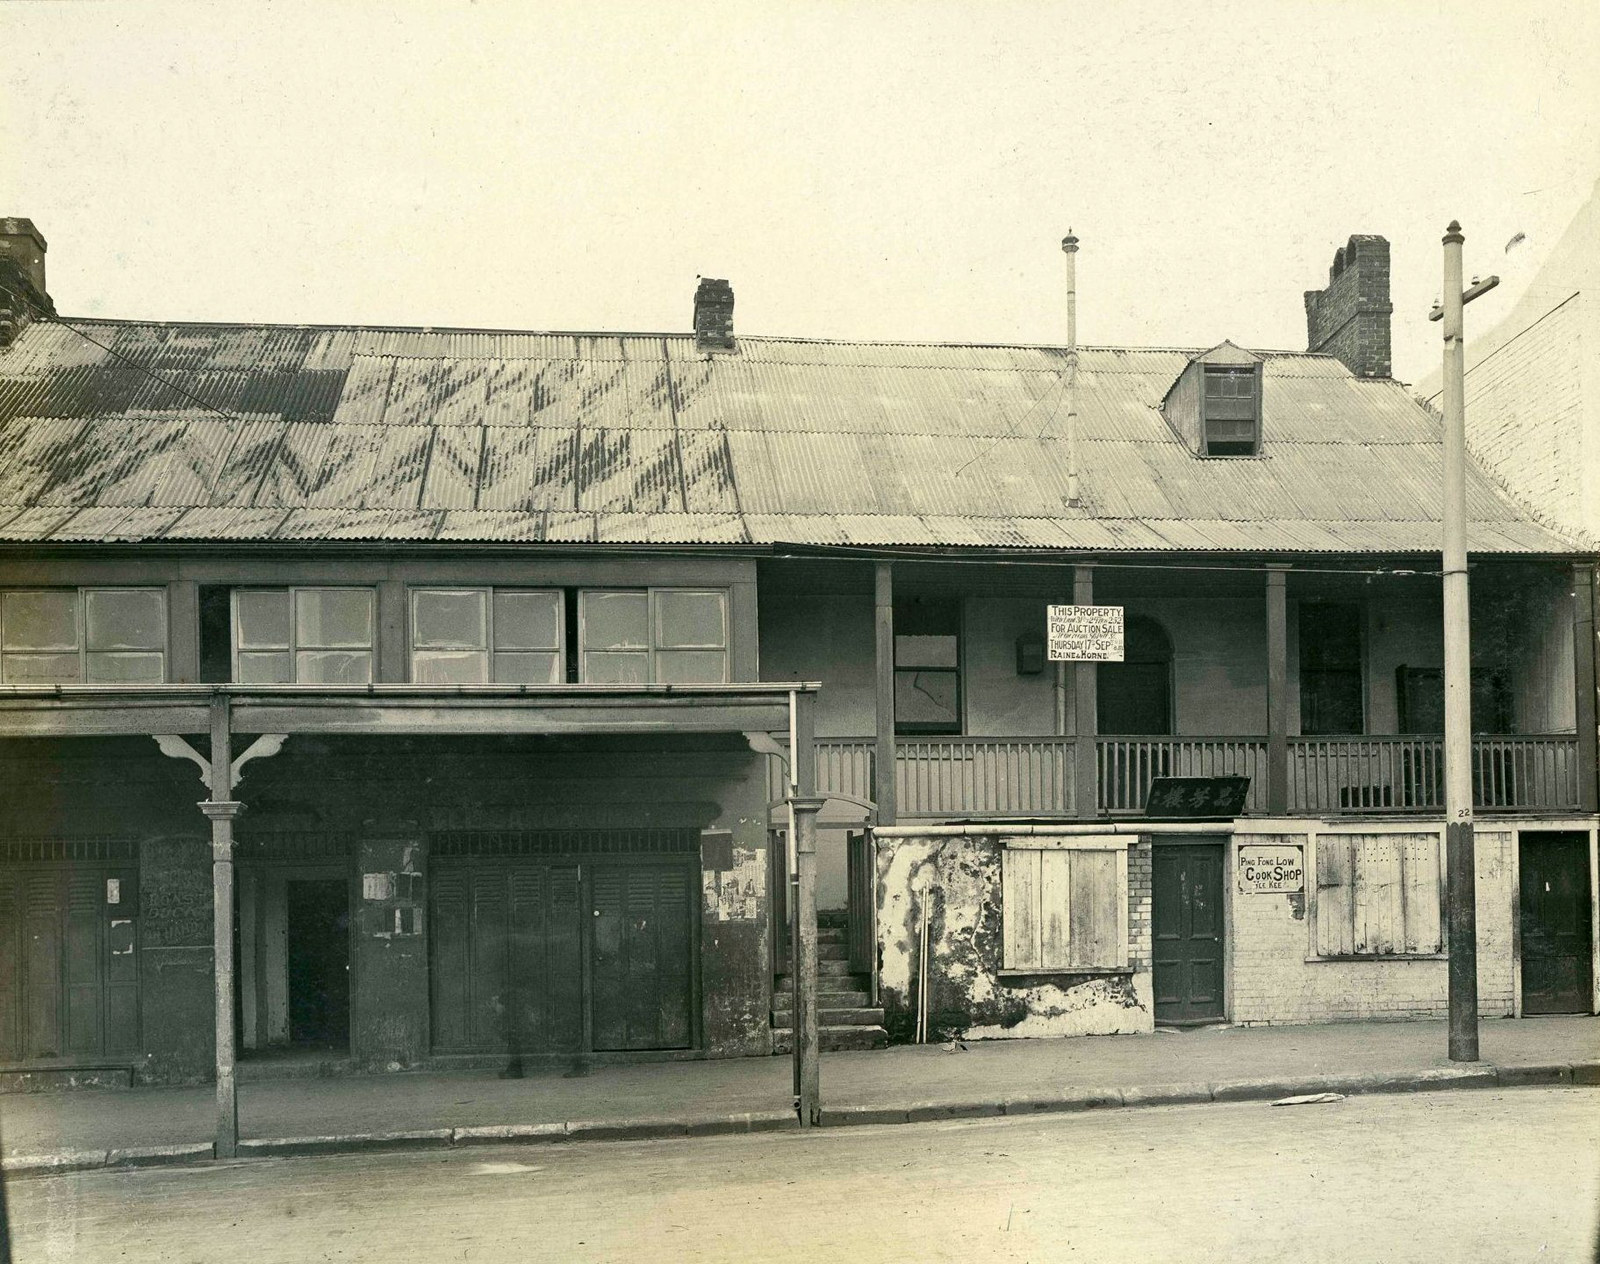 Gambling house, 42-44 Campbell St, Surry Hills